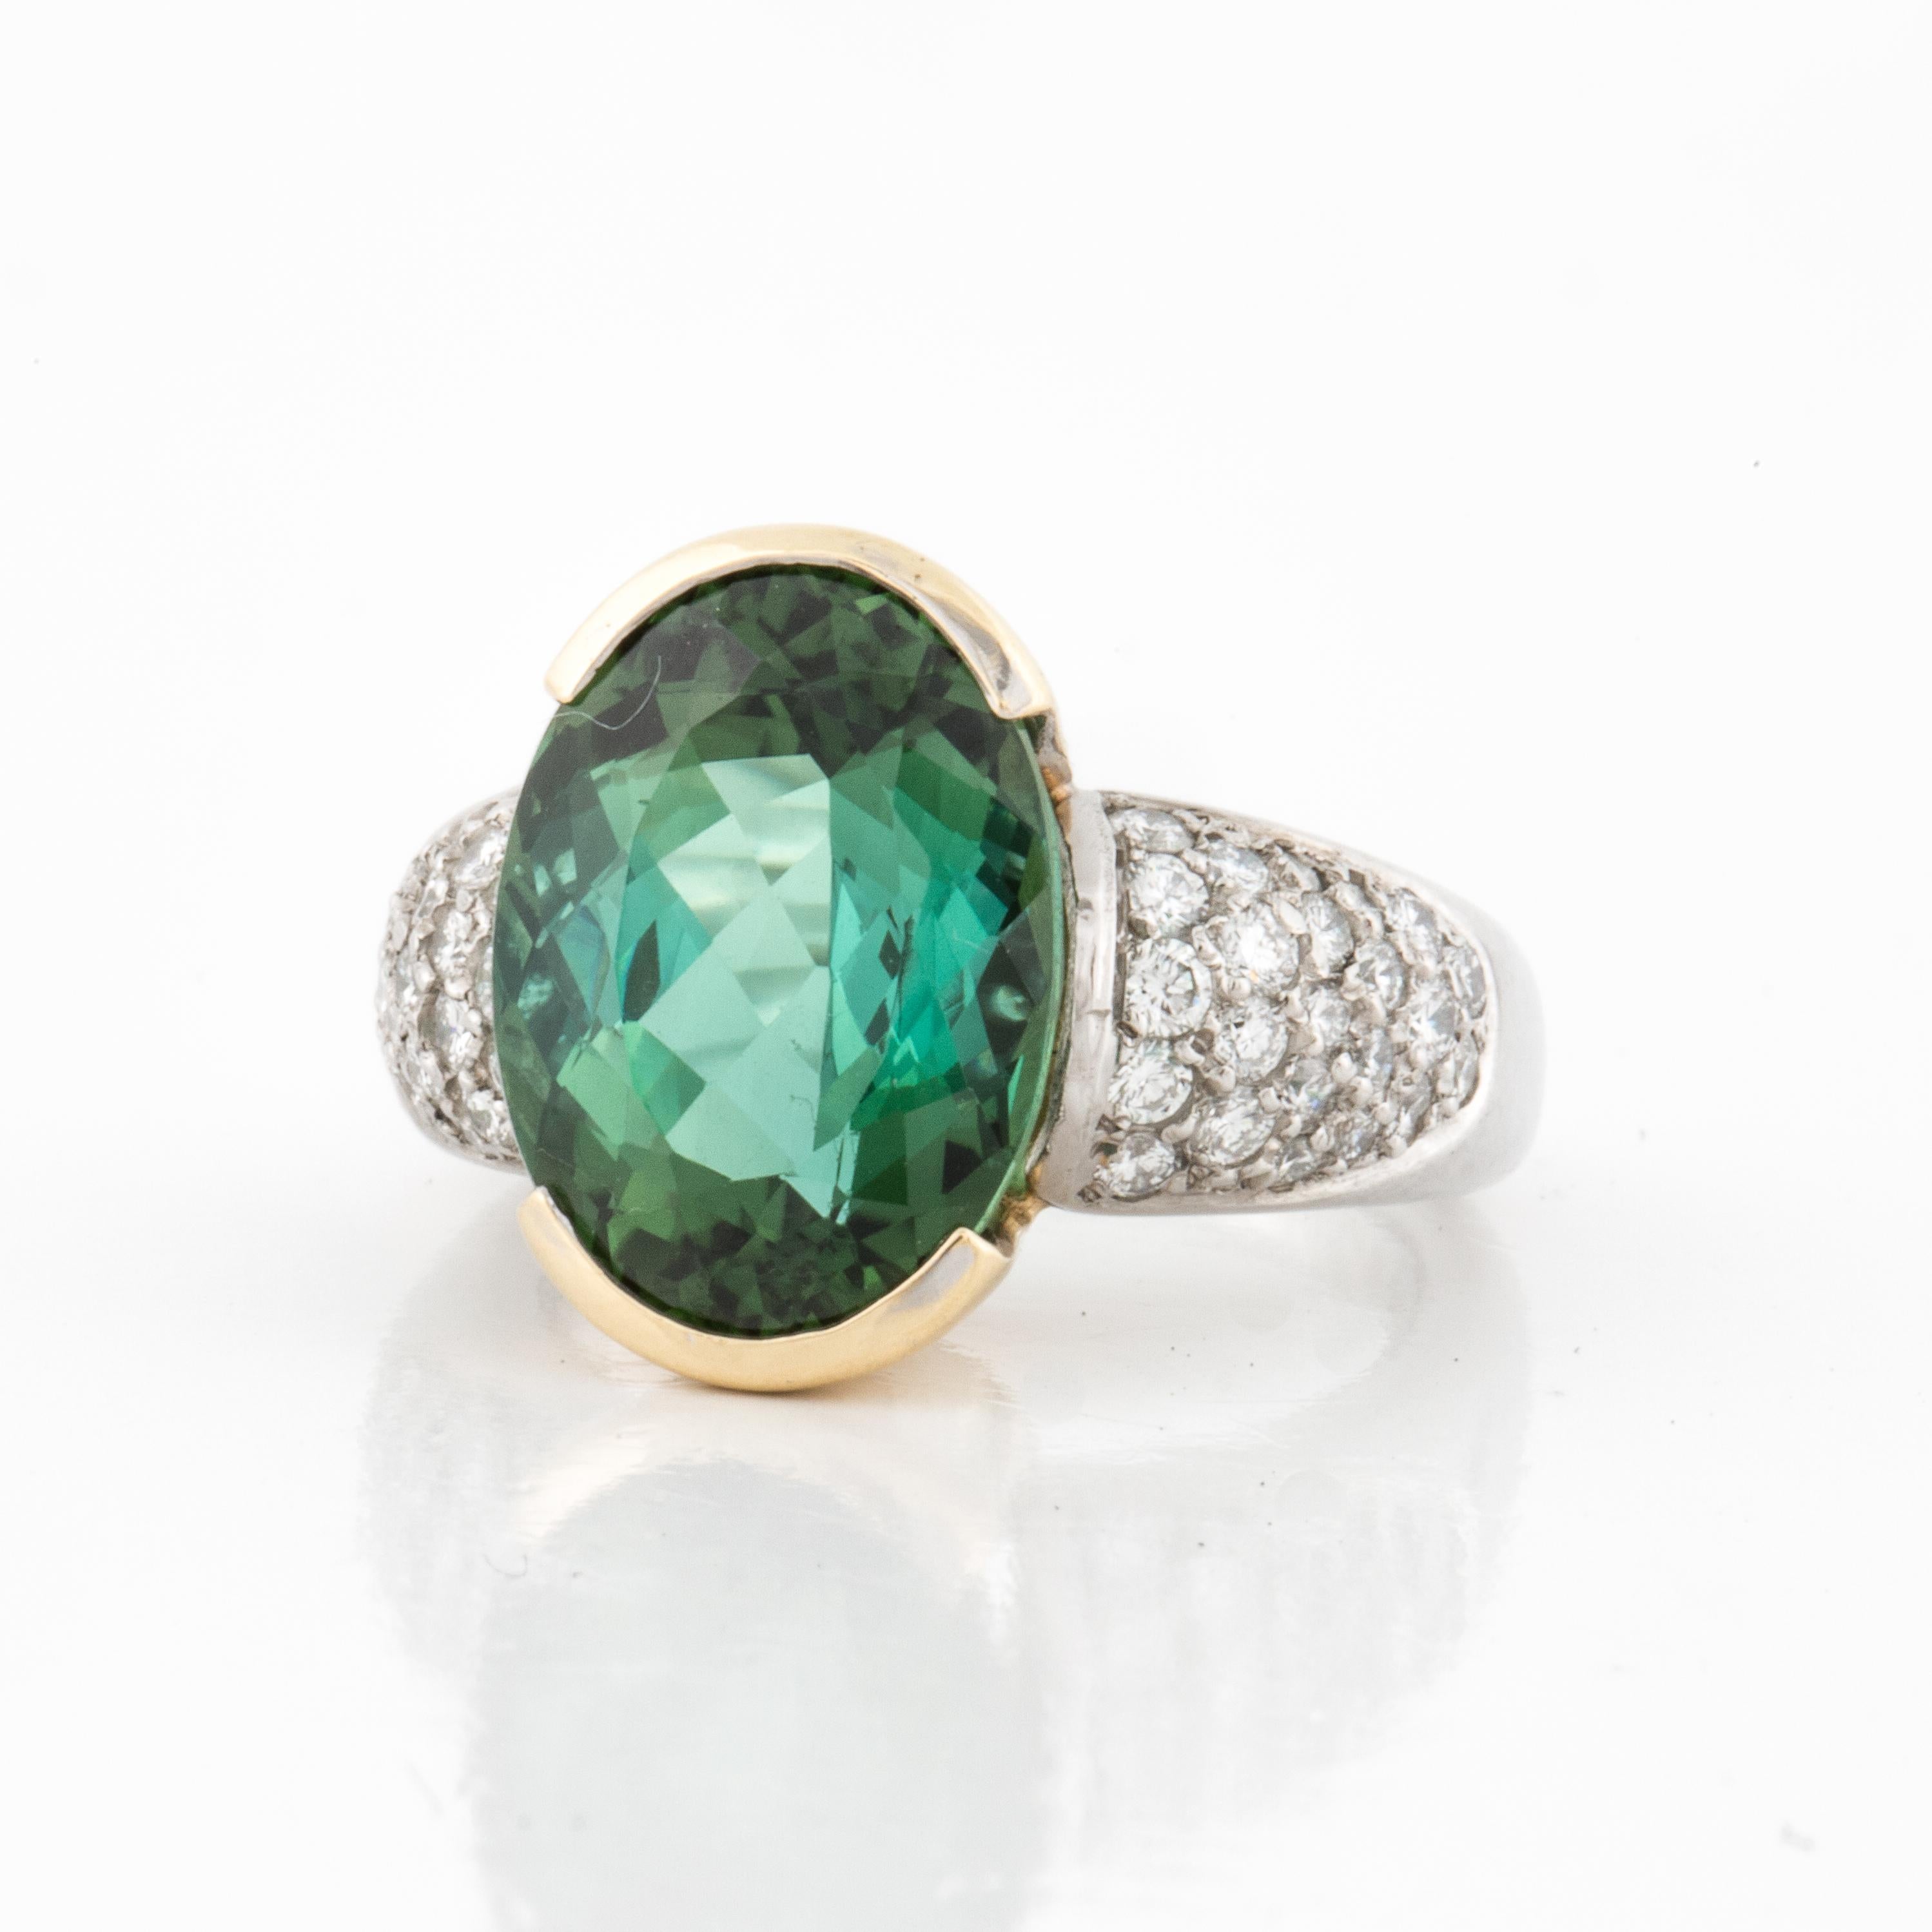 Vintage platinum ring featuring a 7.10 carat green tourmaline in an 18K yellow gold half bezel design.  Additionally there are 46 round diamond accents that total 1.35 carats, F-G color and VVS2-VS1 clarity.  Signed by Erwin Reu.  Circa 1990.  Ring